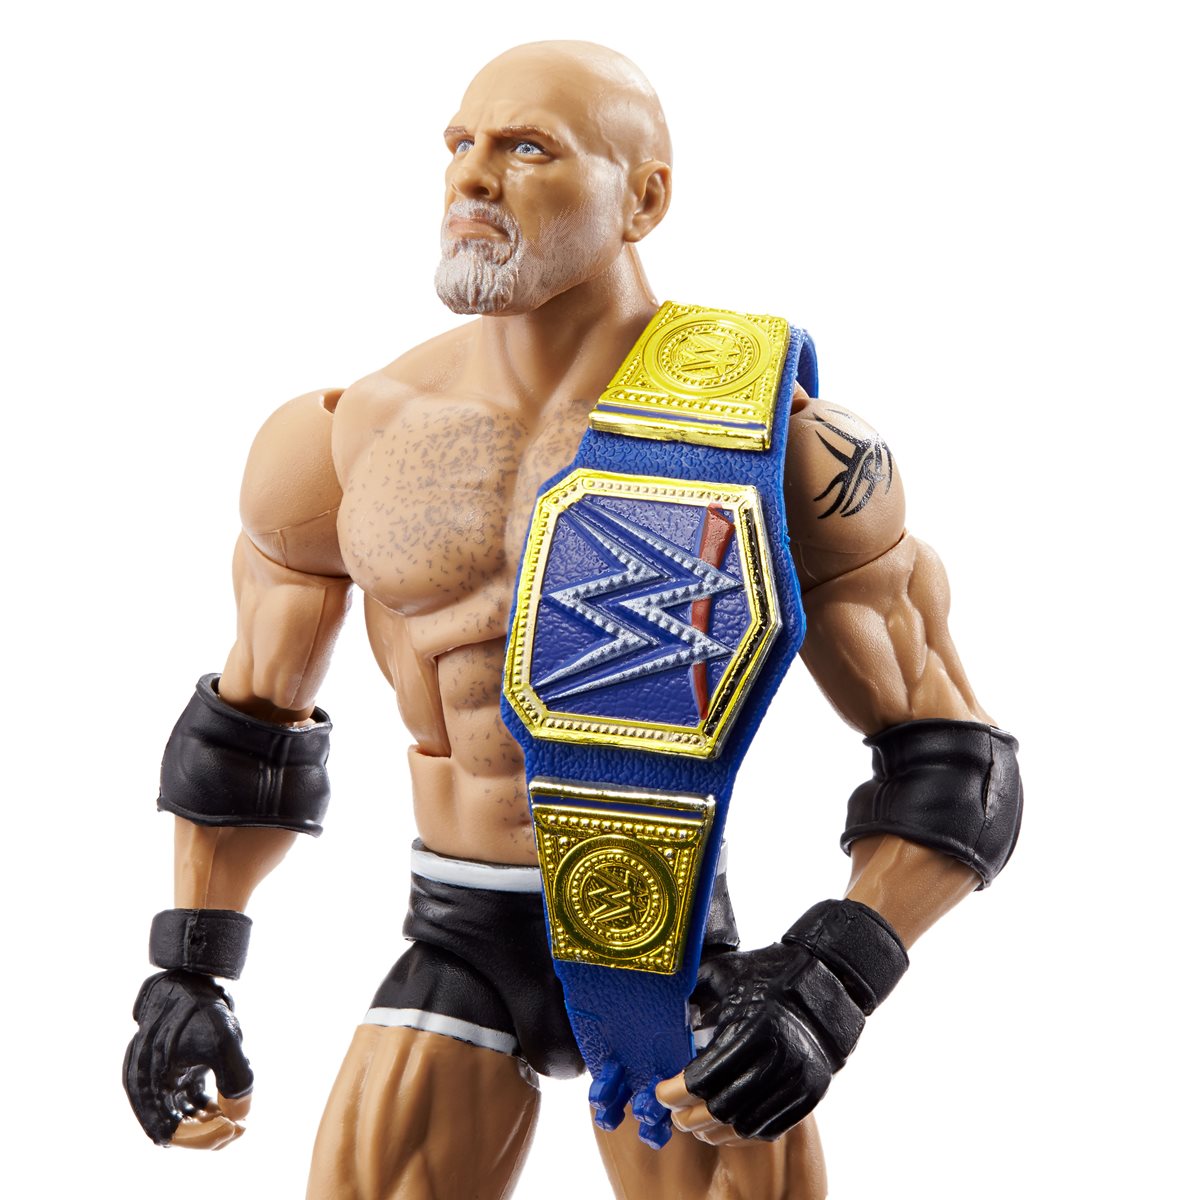 Props Collectibles Action Figures Wresting Accessories For WWE Wrestling 5 Piece